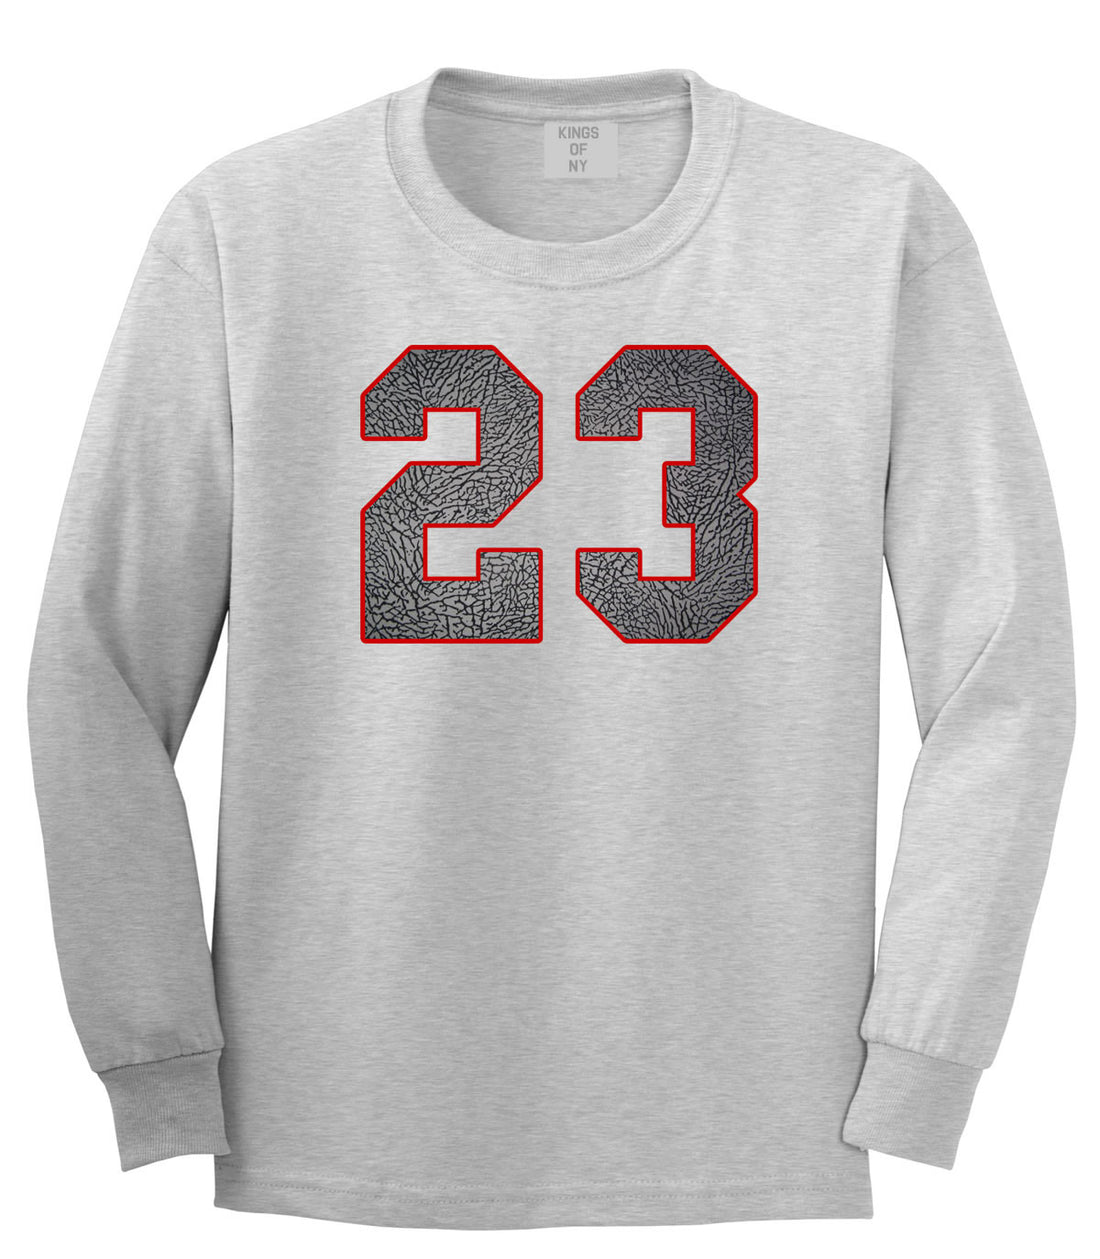 23 Cement Red Jersey Long Sleeve T-Shirt in Grey By Kings Of NY